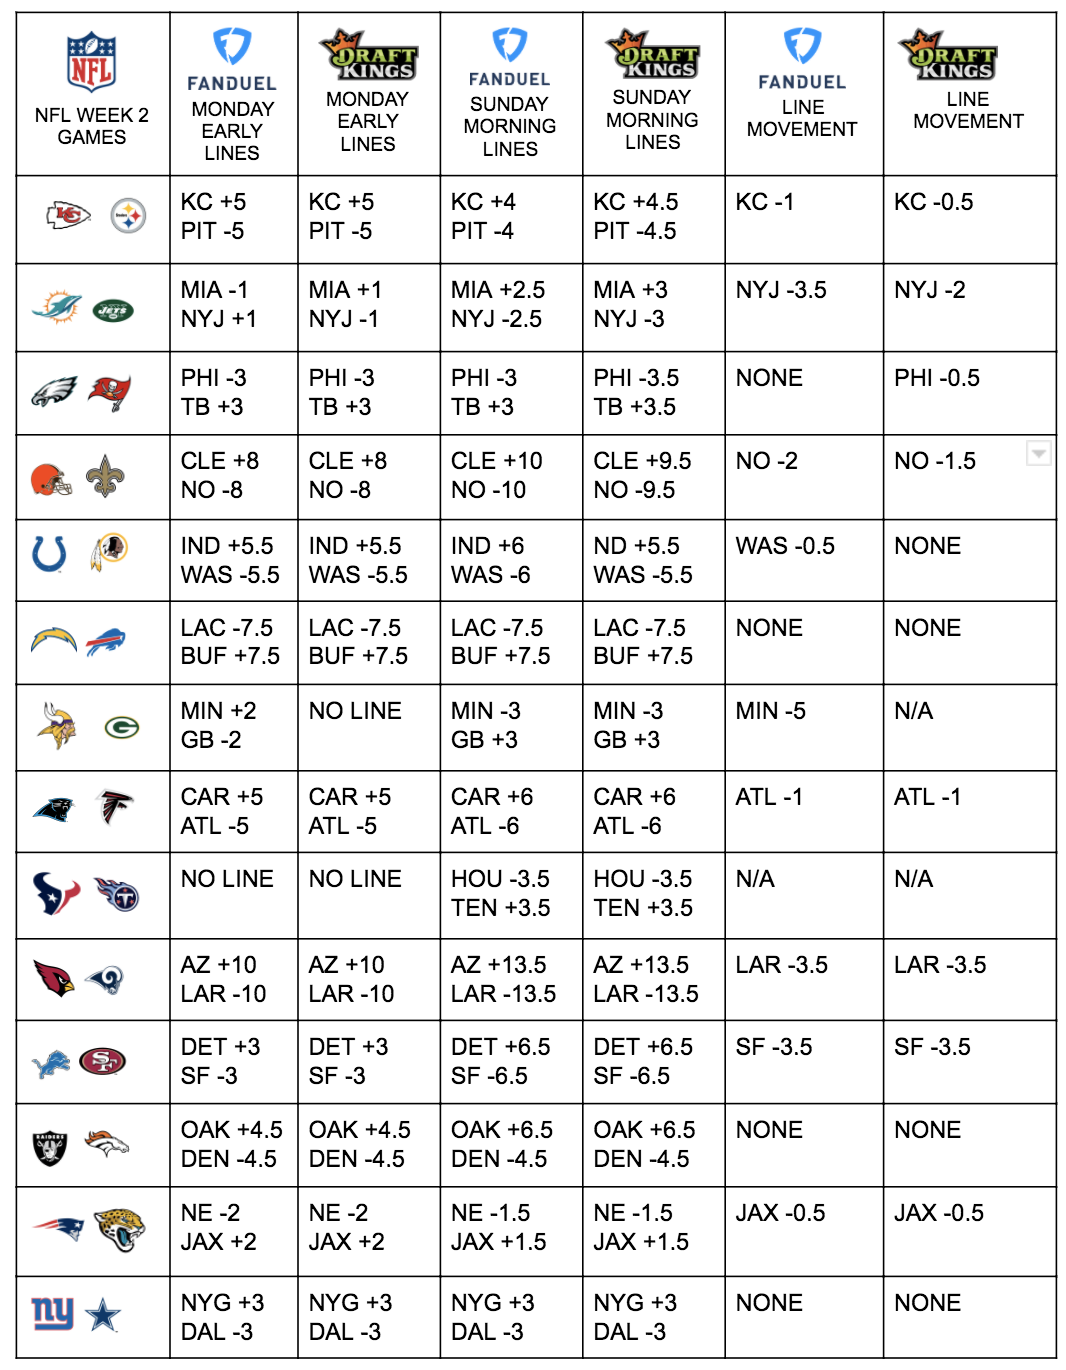 Your NFL Week 2 Betting Line Movement Chart - Crossing Broad